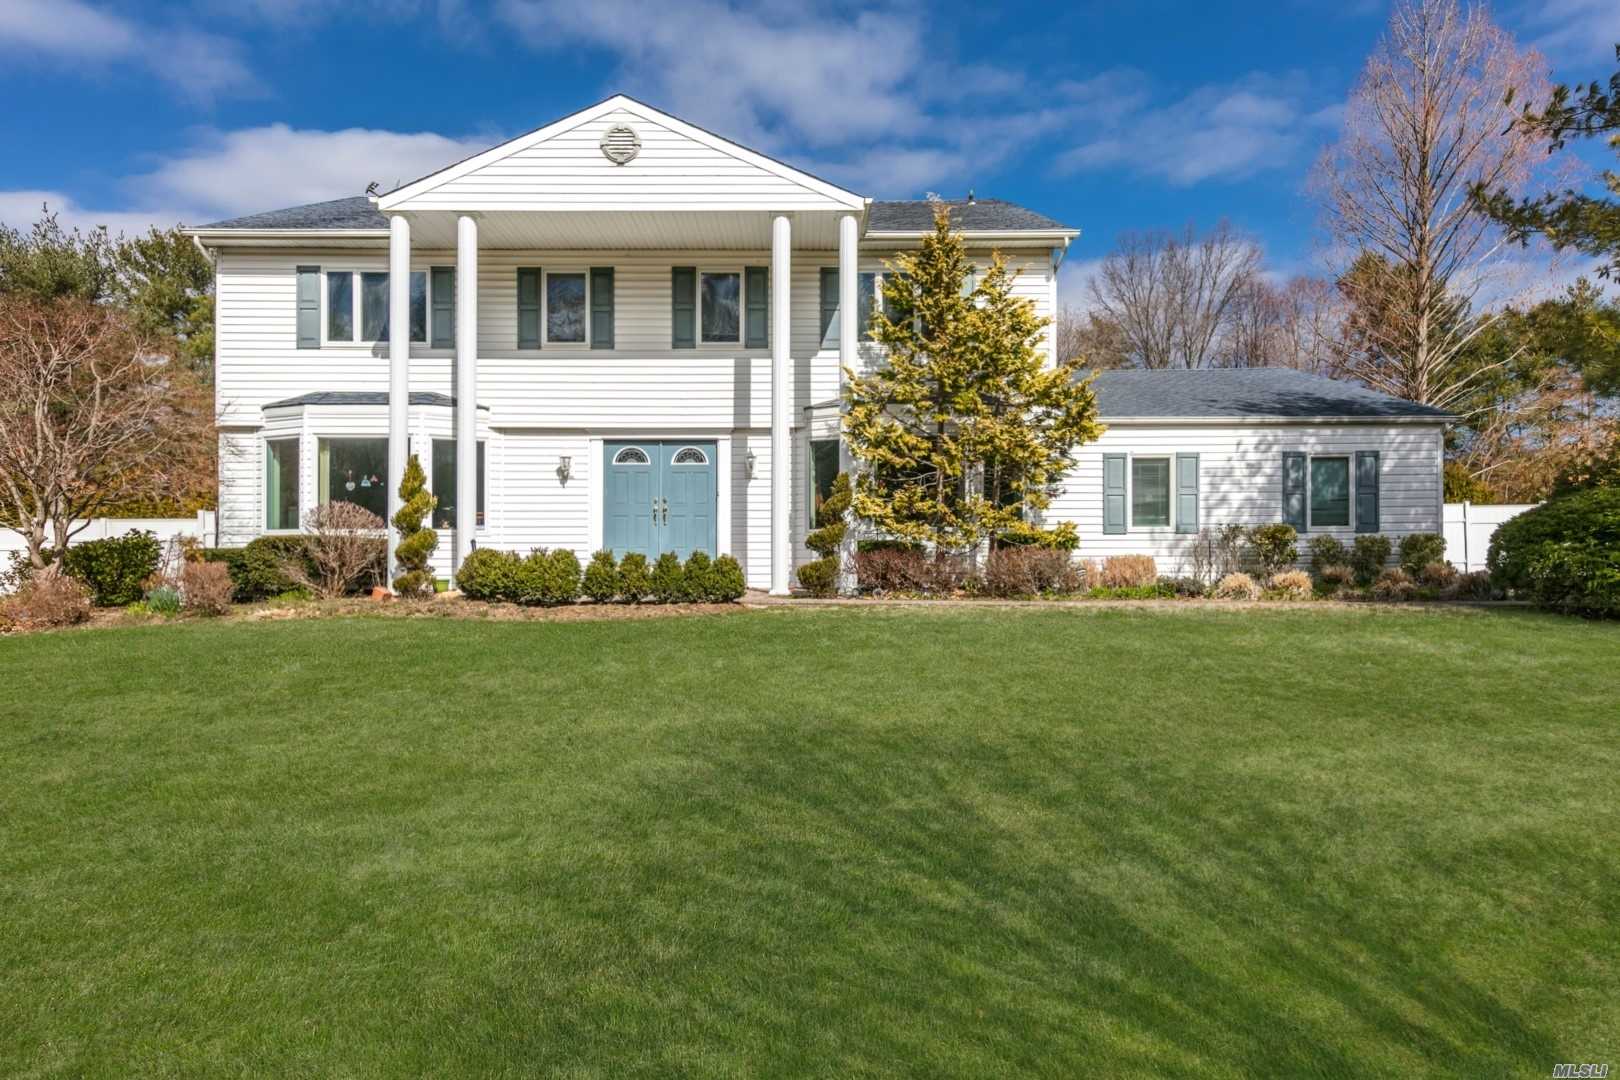 Suffolk County Dix Hills New York (NY) Real Estate Listings By City